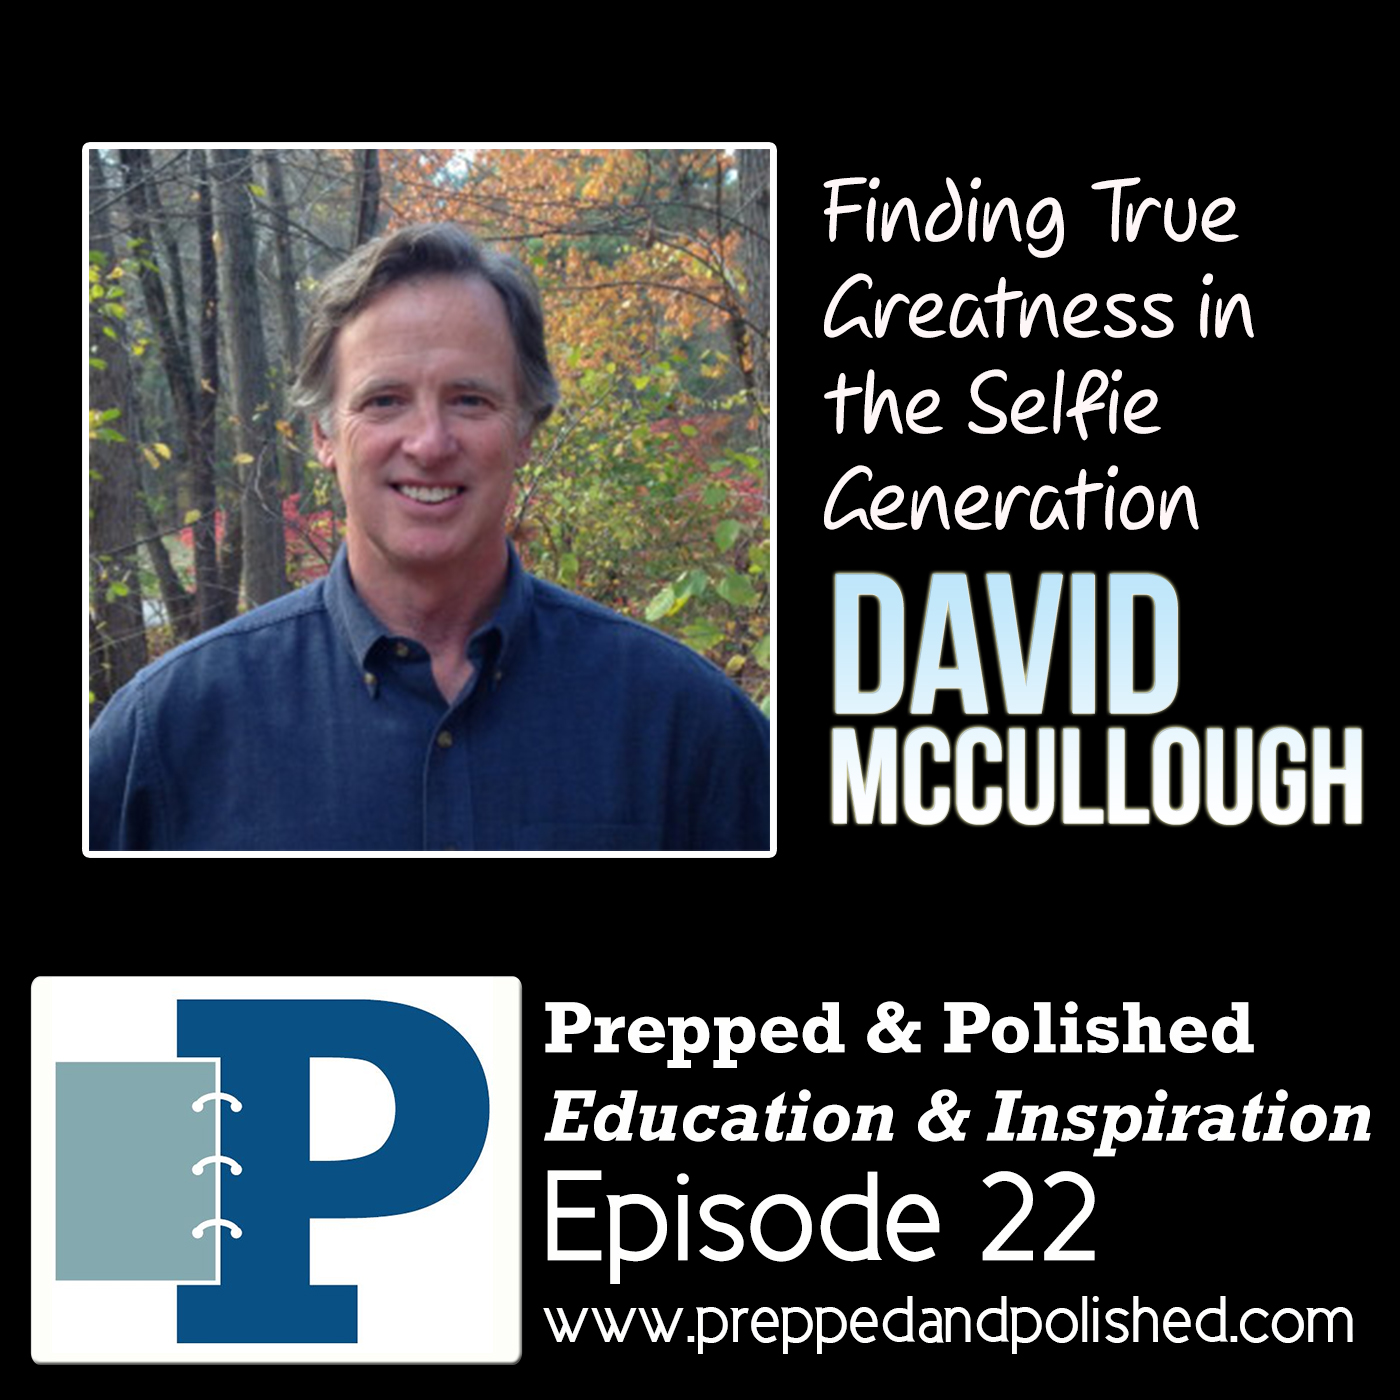 David McCullough – Finding True Greatness in the Selfie Generation